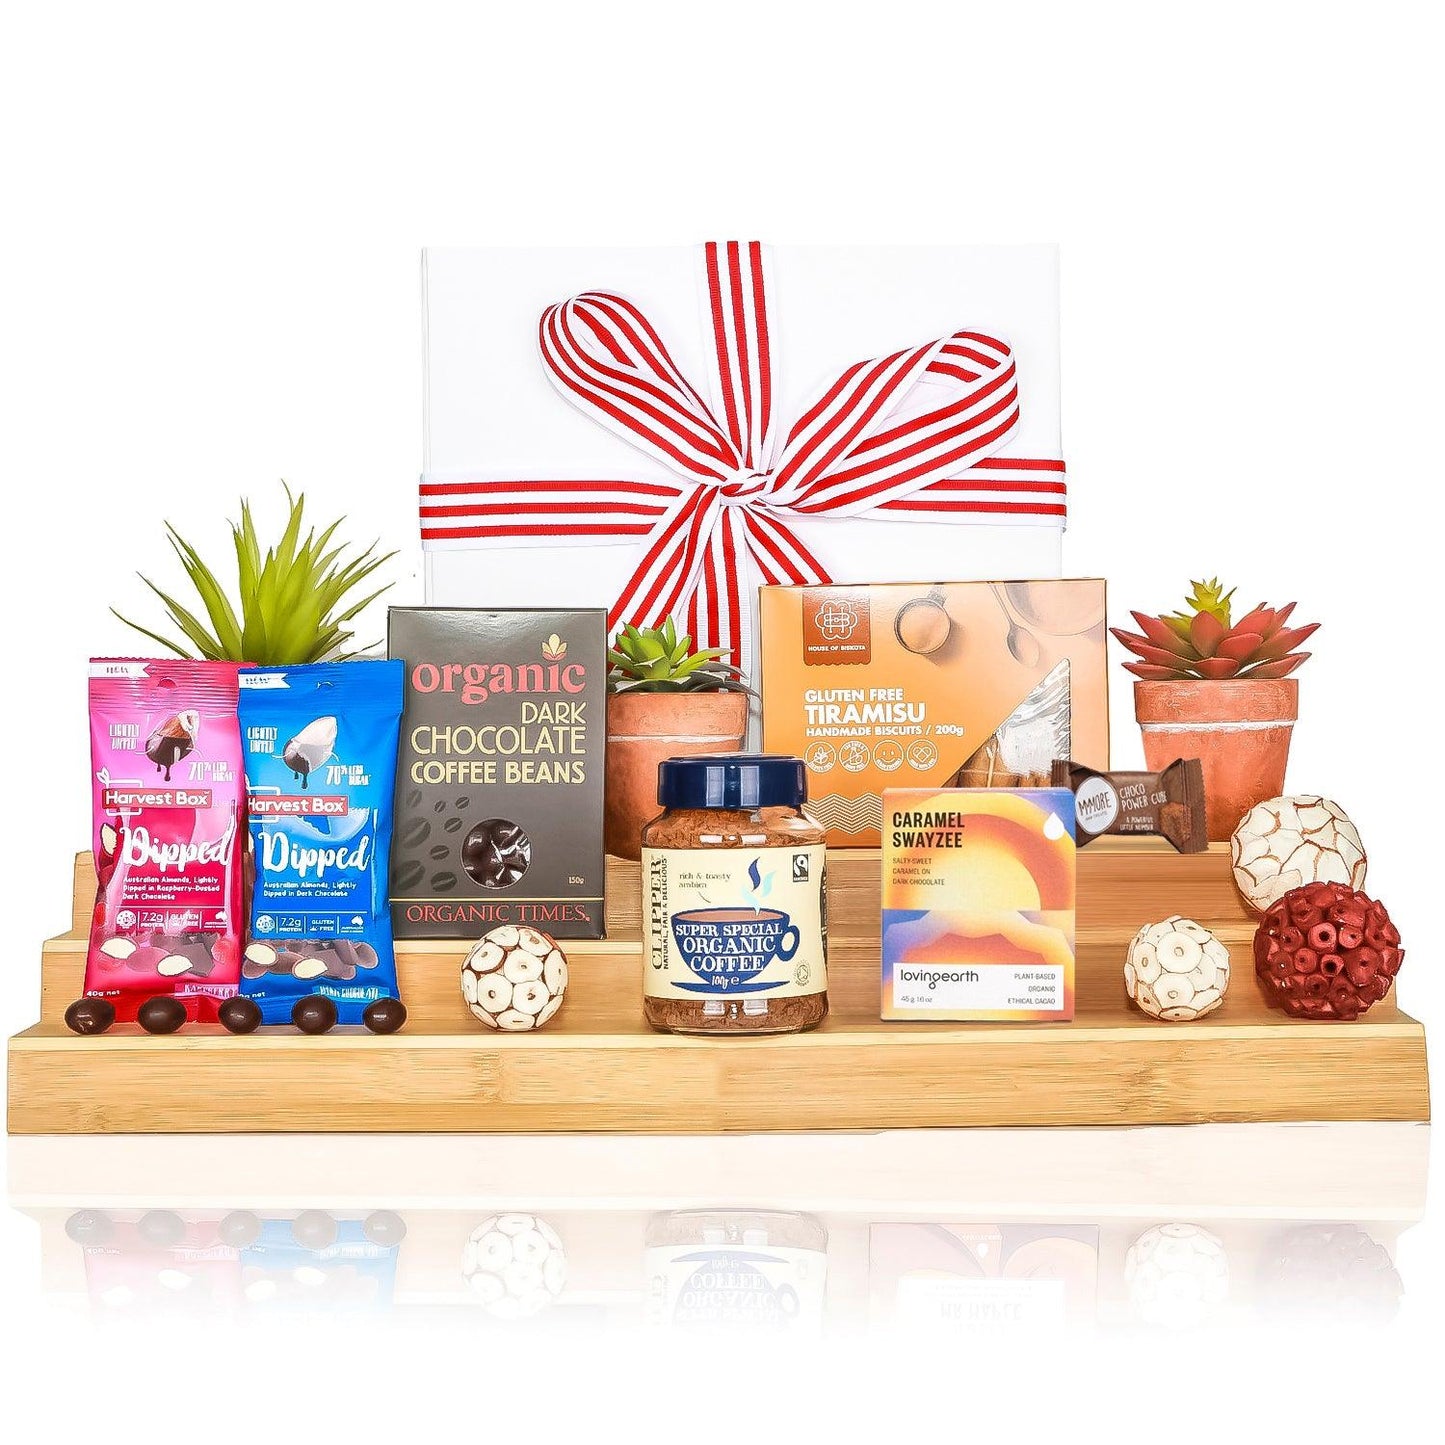 Wake Me Up for Coffee - Healthy Belly Hampers - pure indulgence - birthday hampers - gift hampers - gift hampers melbourne - gift hampers australia - organic hampers -vegan hampers - gluten free hampers - birthday hampers -anniversary hampers - wedding hampers - alcohol hampers